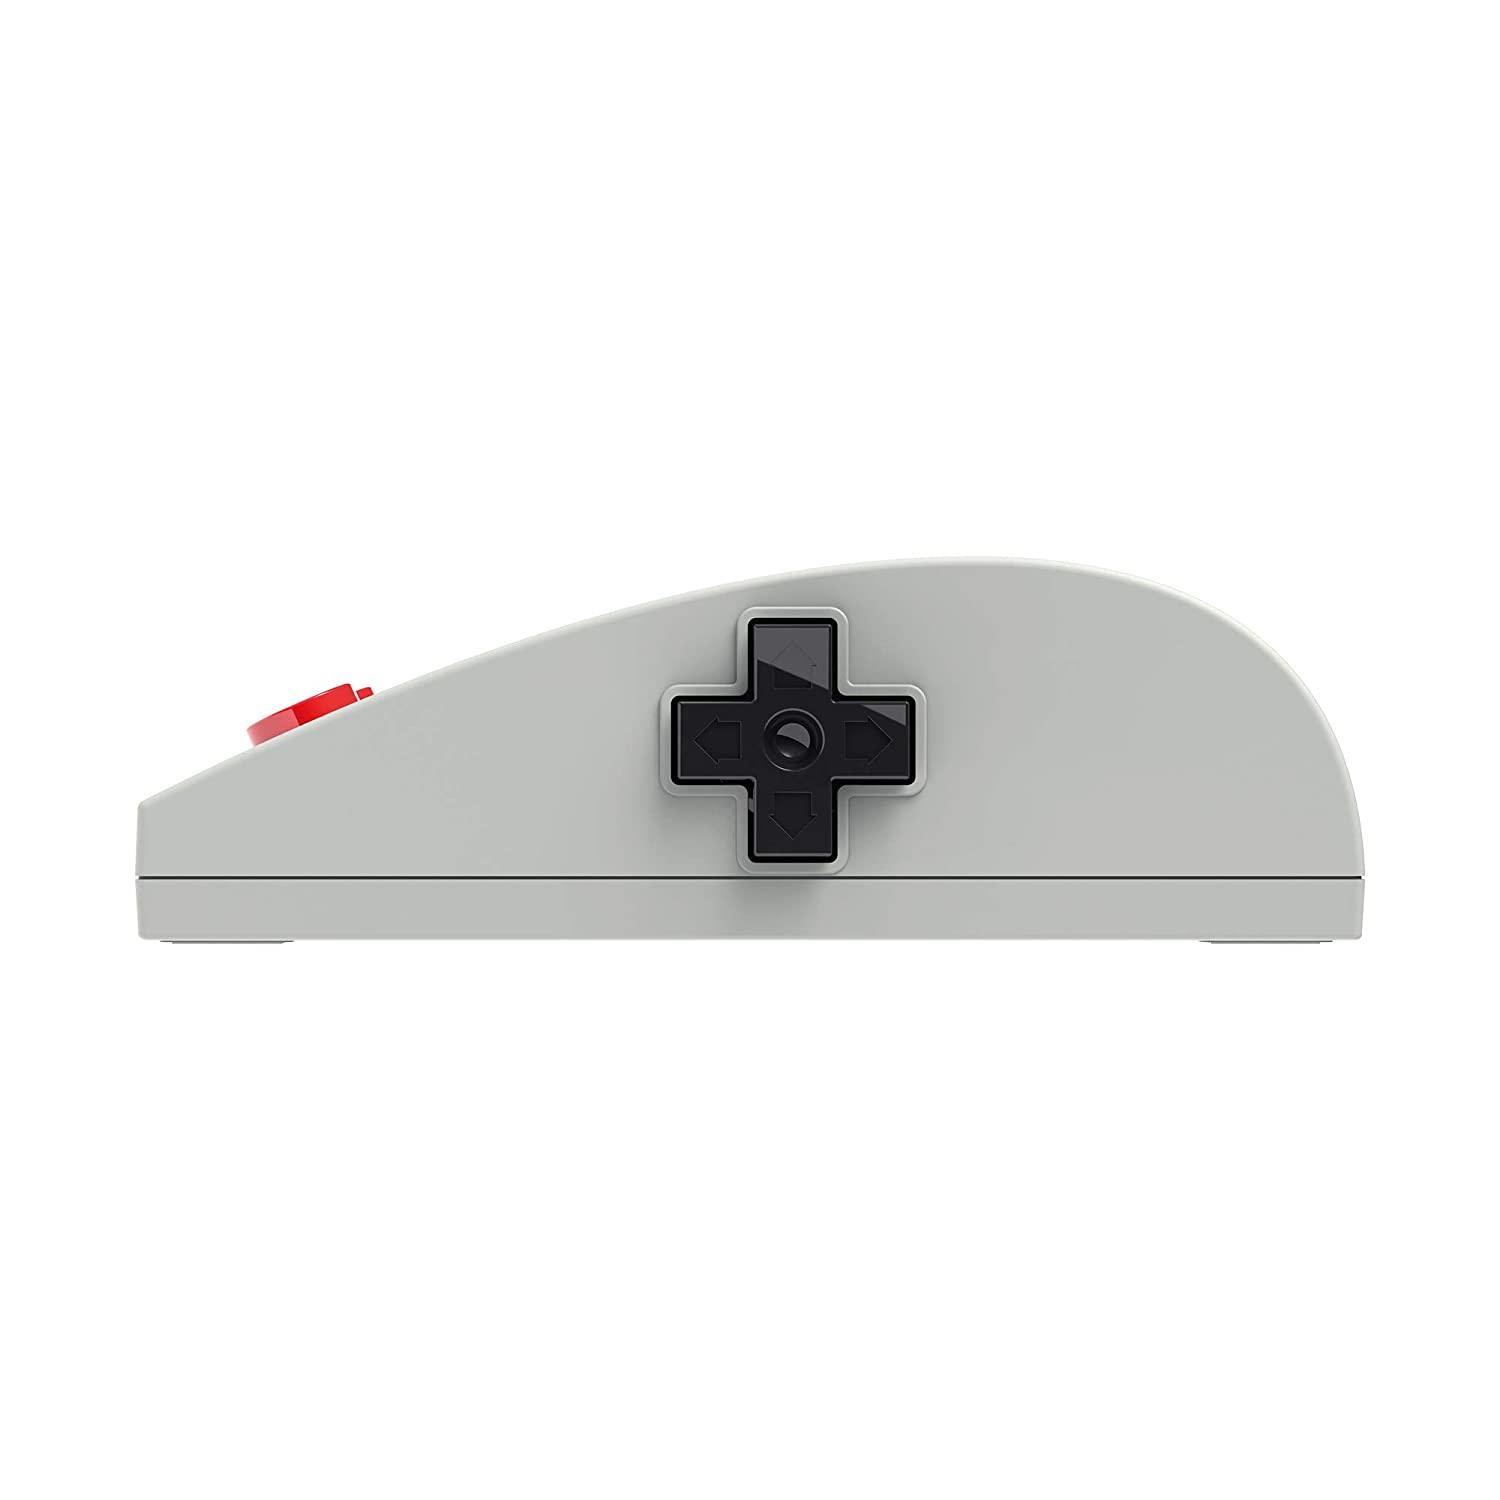 8Bitdo N30 2.4Ghz Wireless Mouse for Windows and Mac PC DVD - 8bitdo